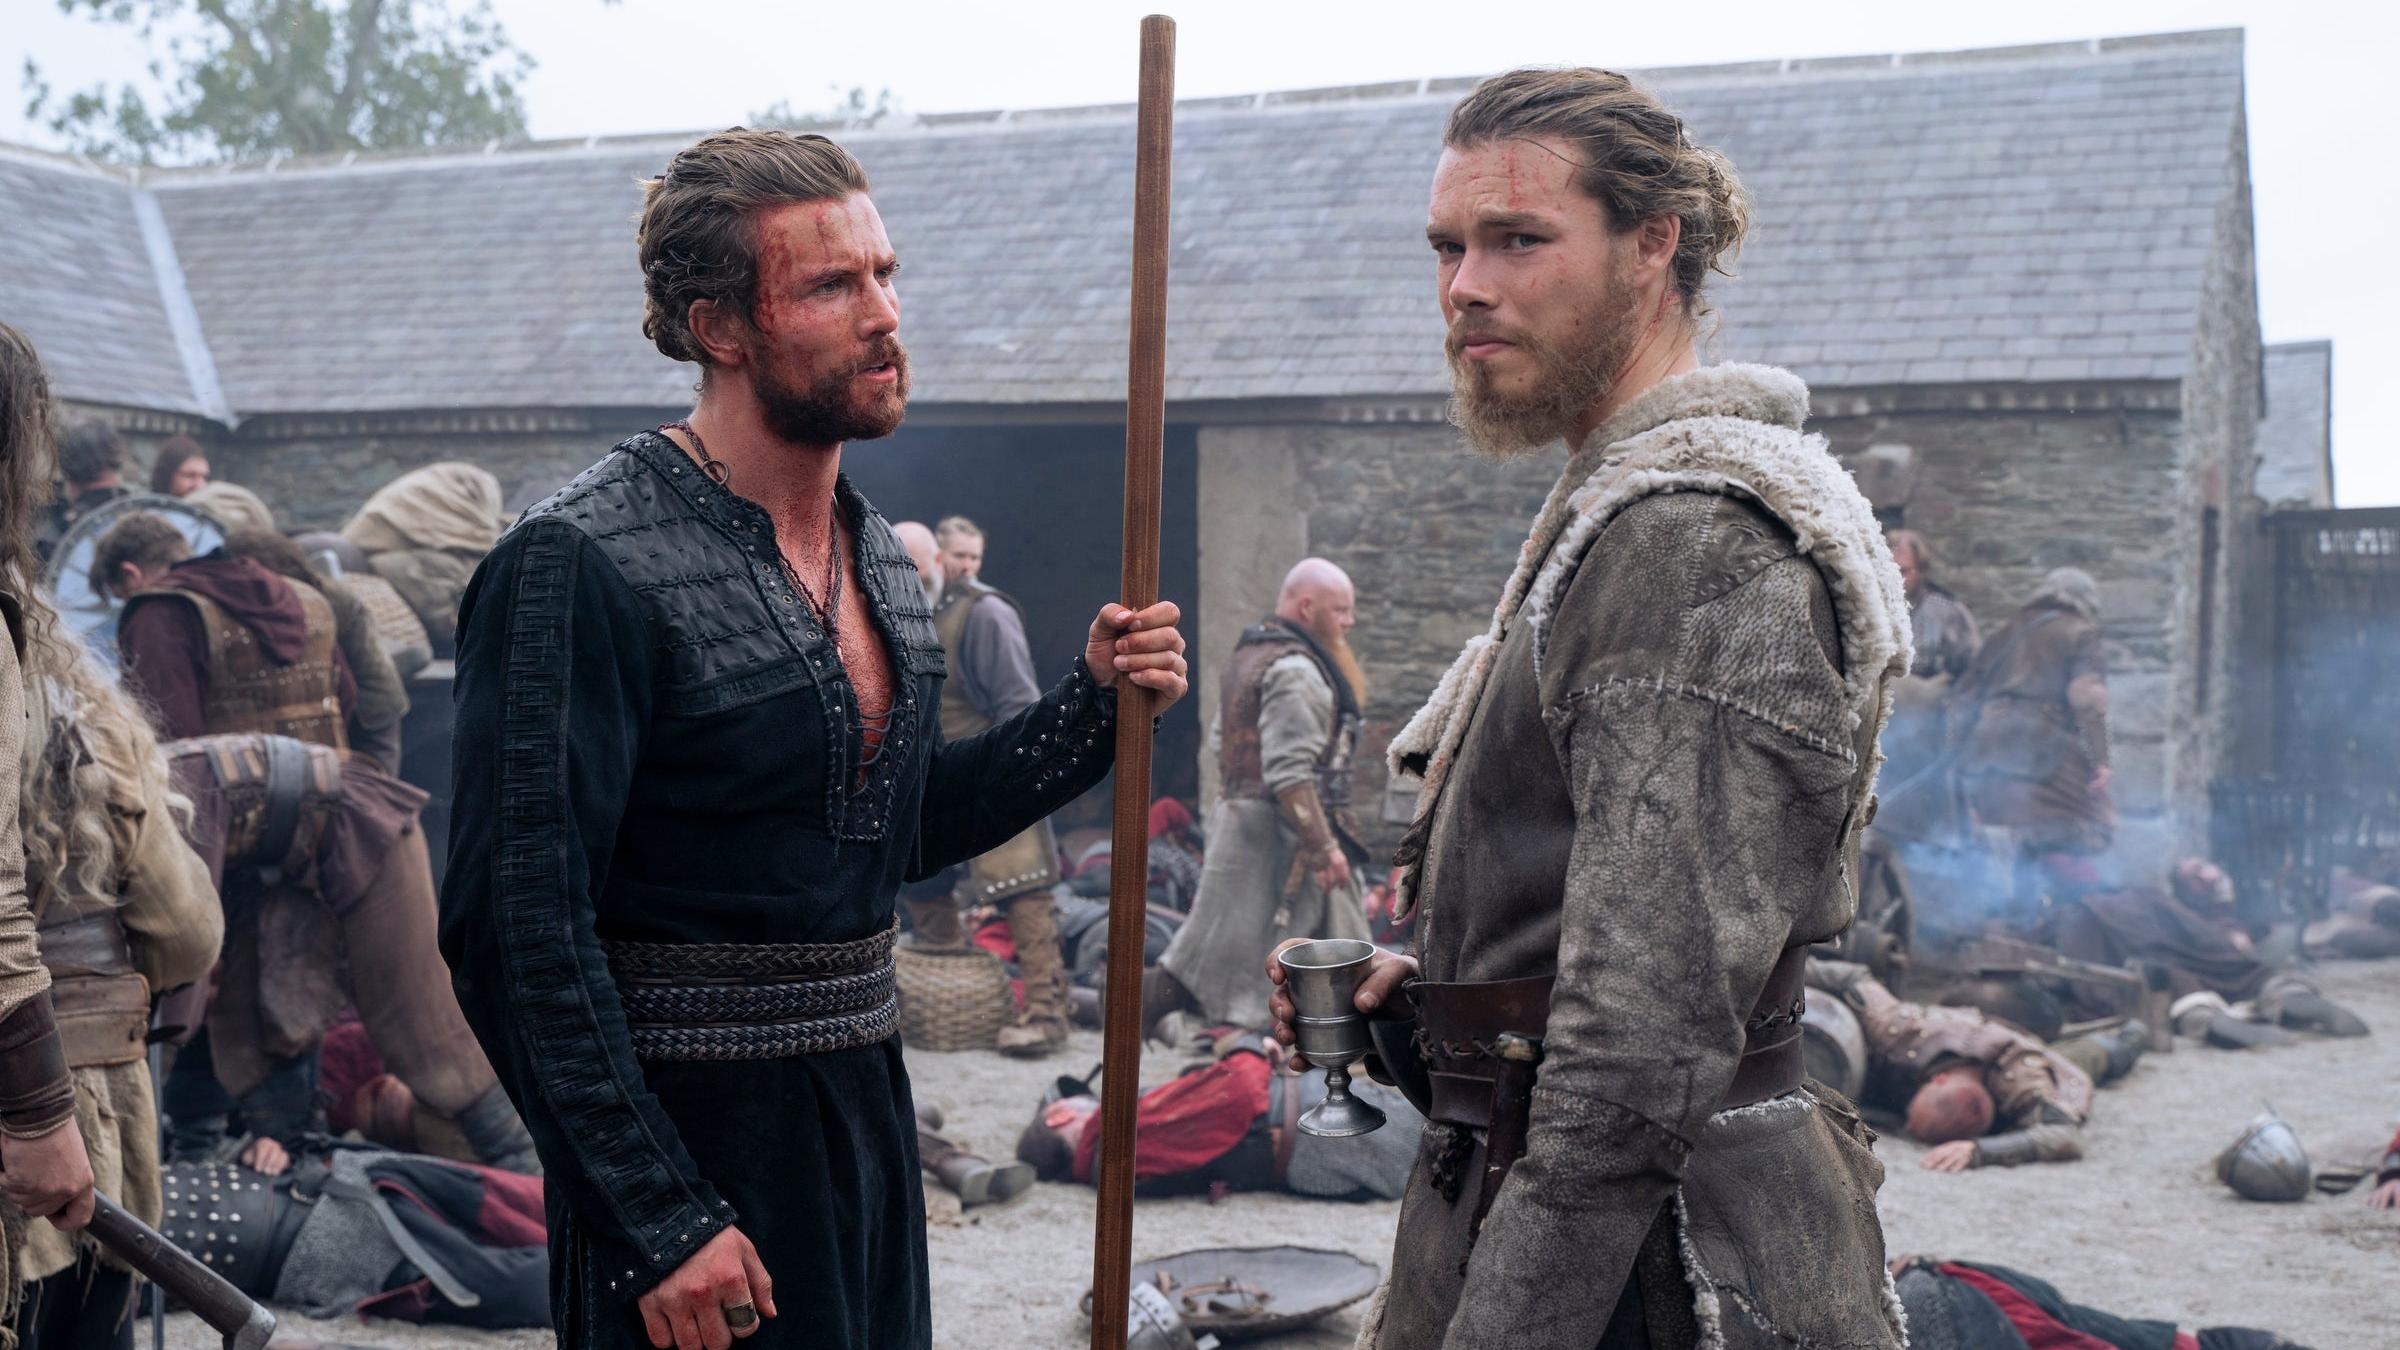 Valhalla reshapes Vikings as a century-later action movie, with entertaining results